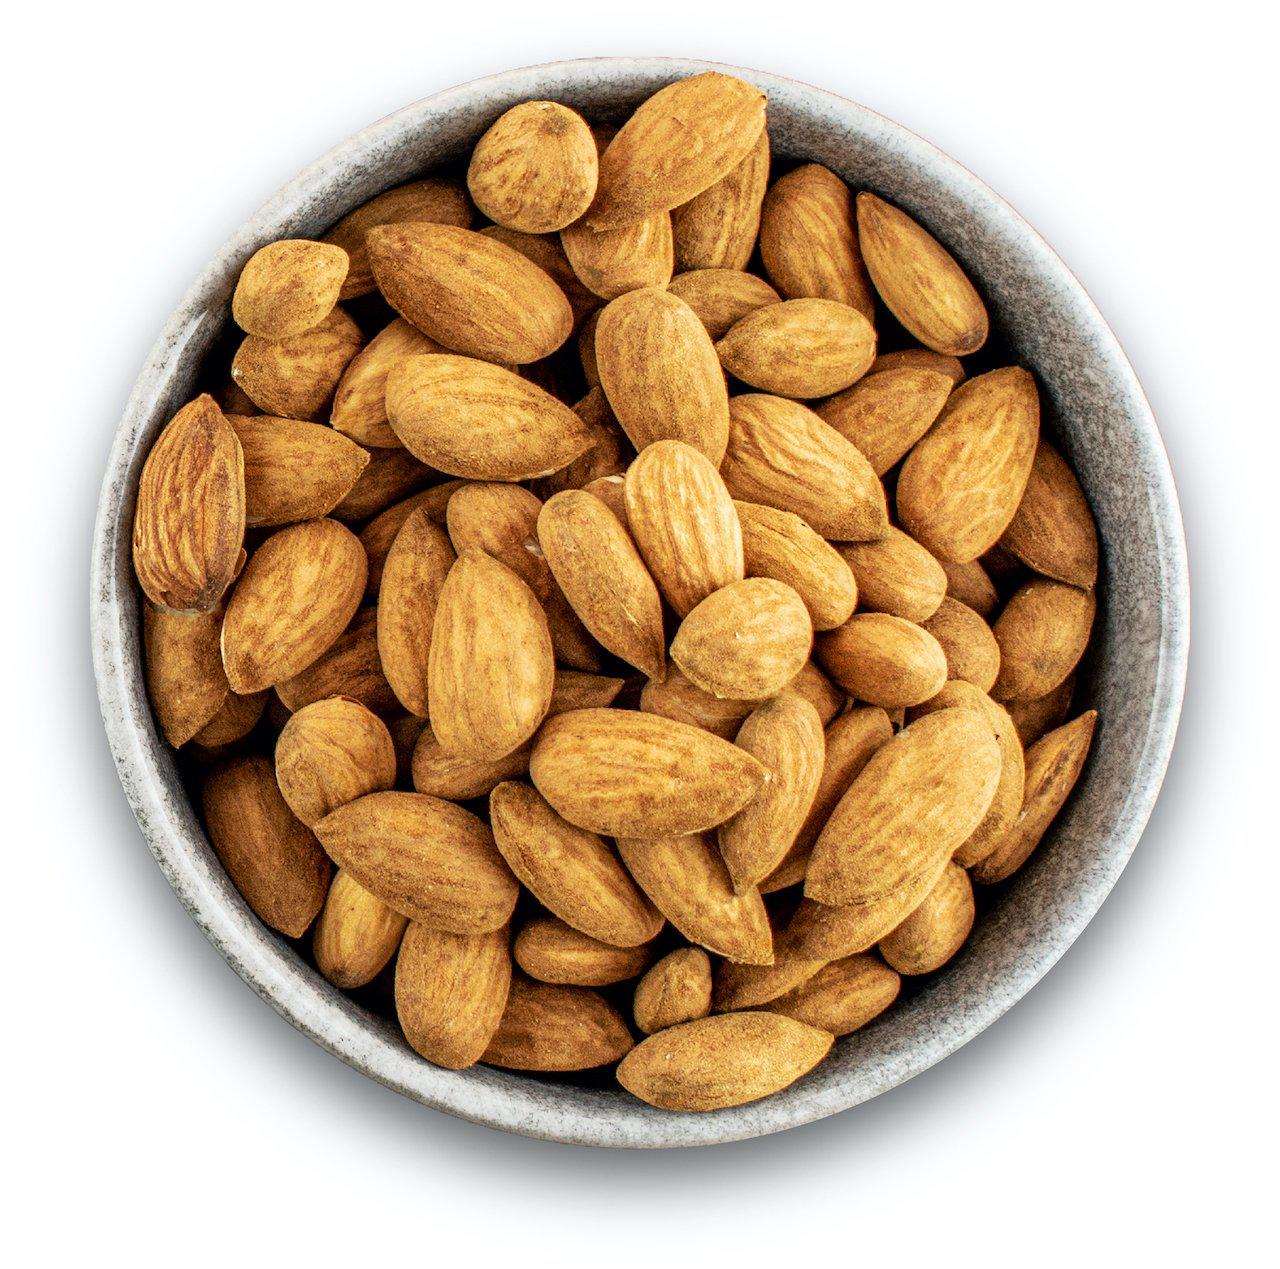 2Die4 Live Foods Activated & Organic Almonds 120g, 300g Or 600g